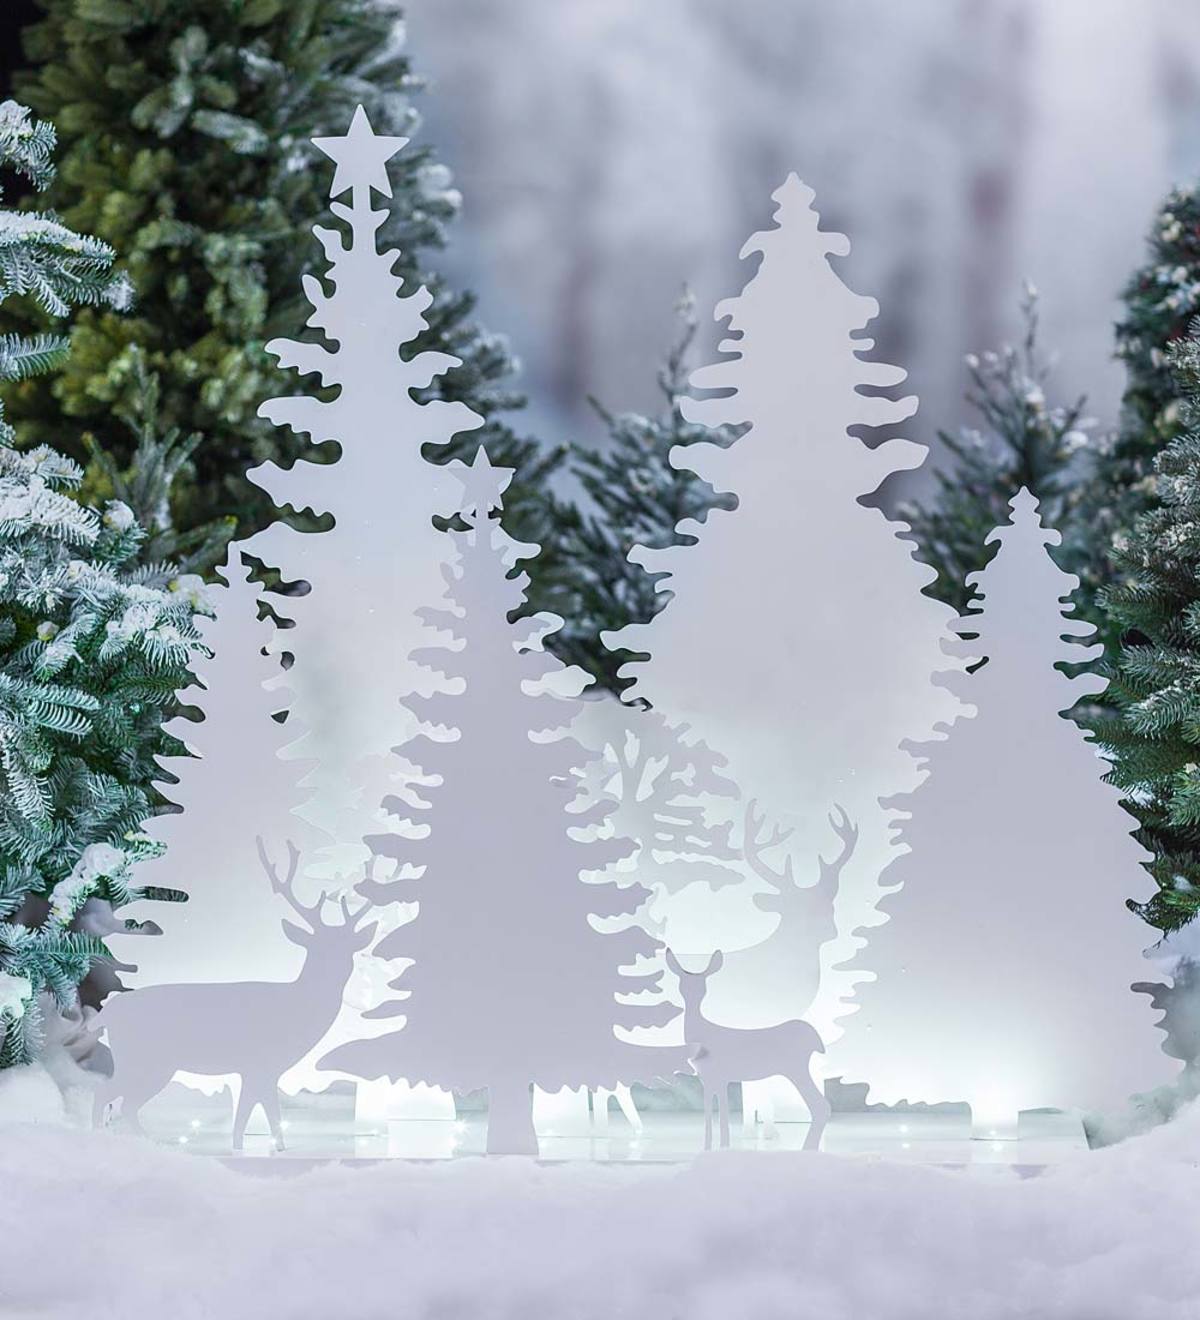 Lighted Metal Deer and Trees Silhouettes Diorama